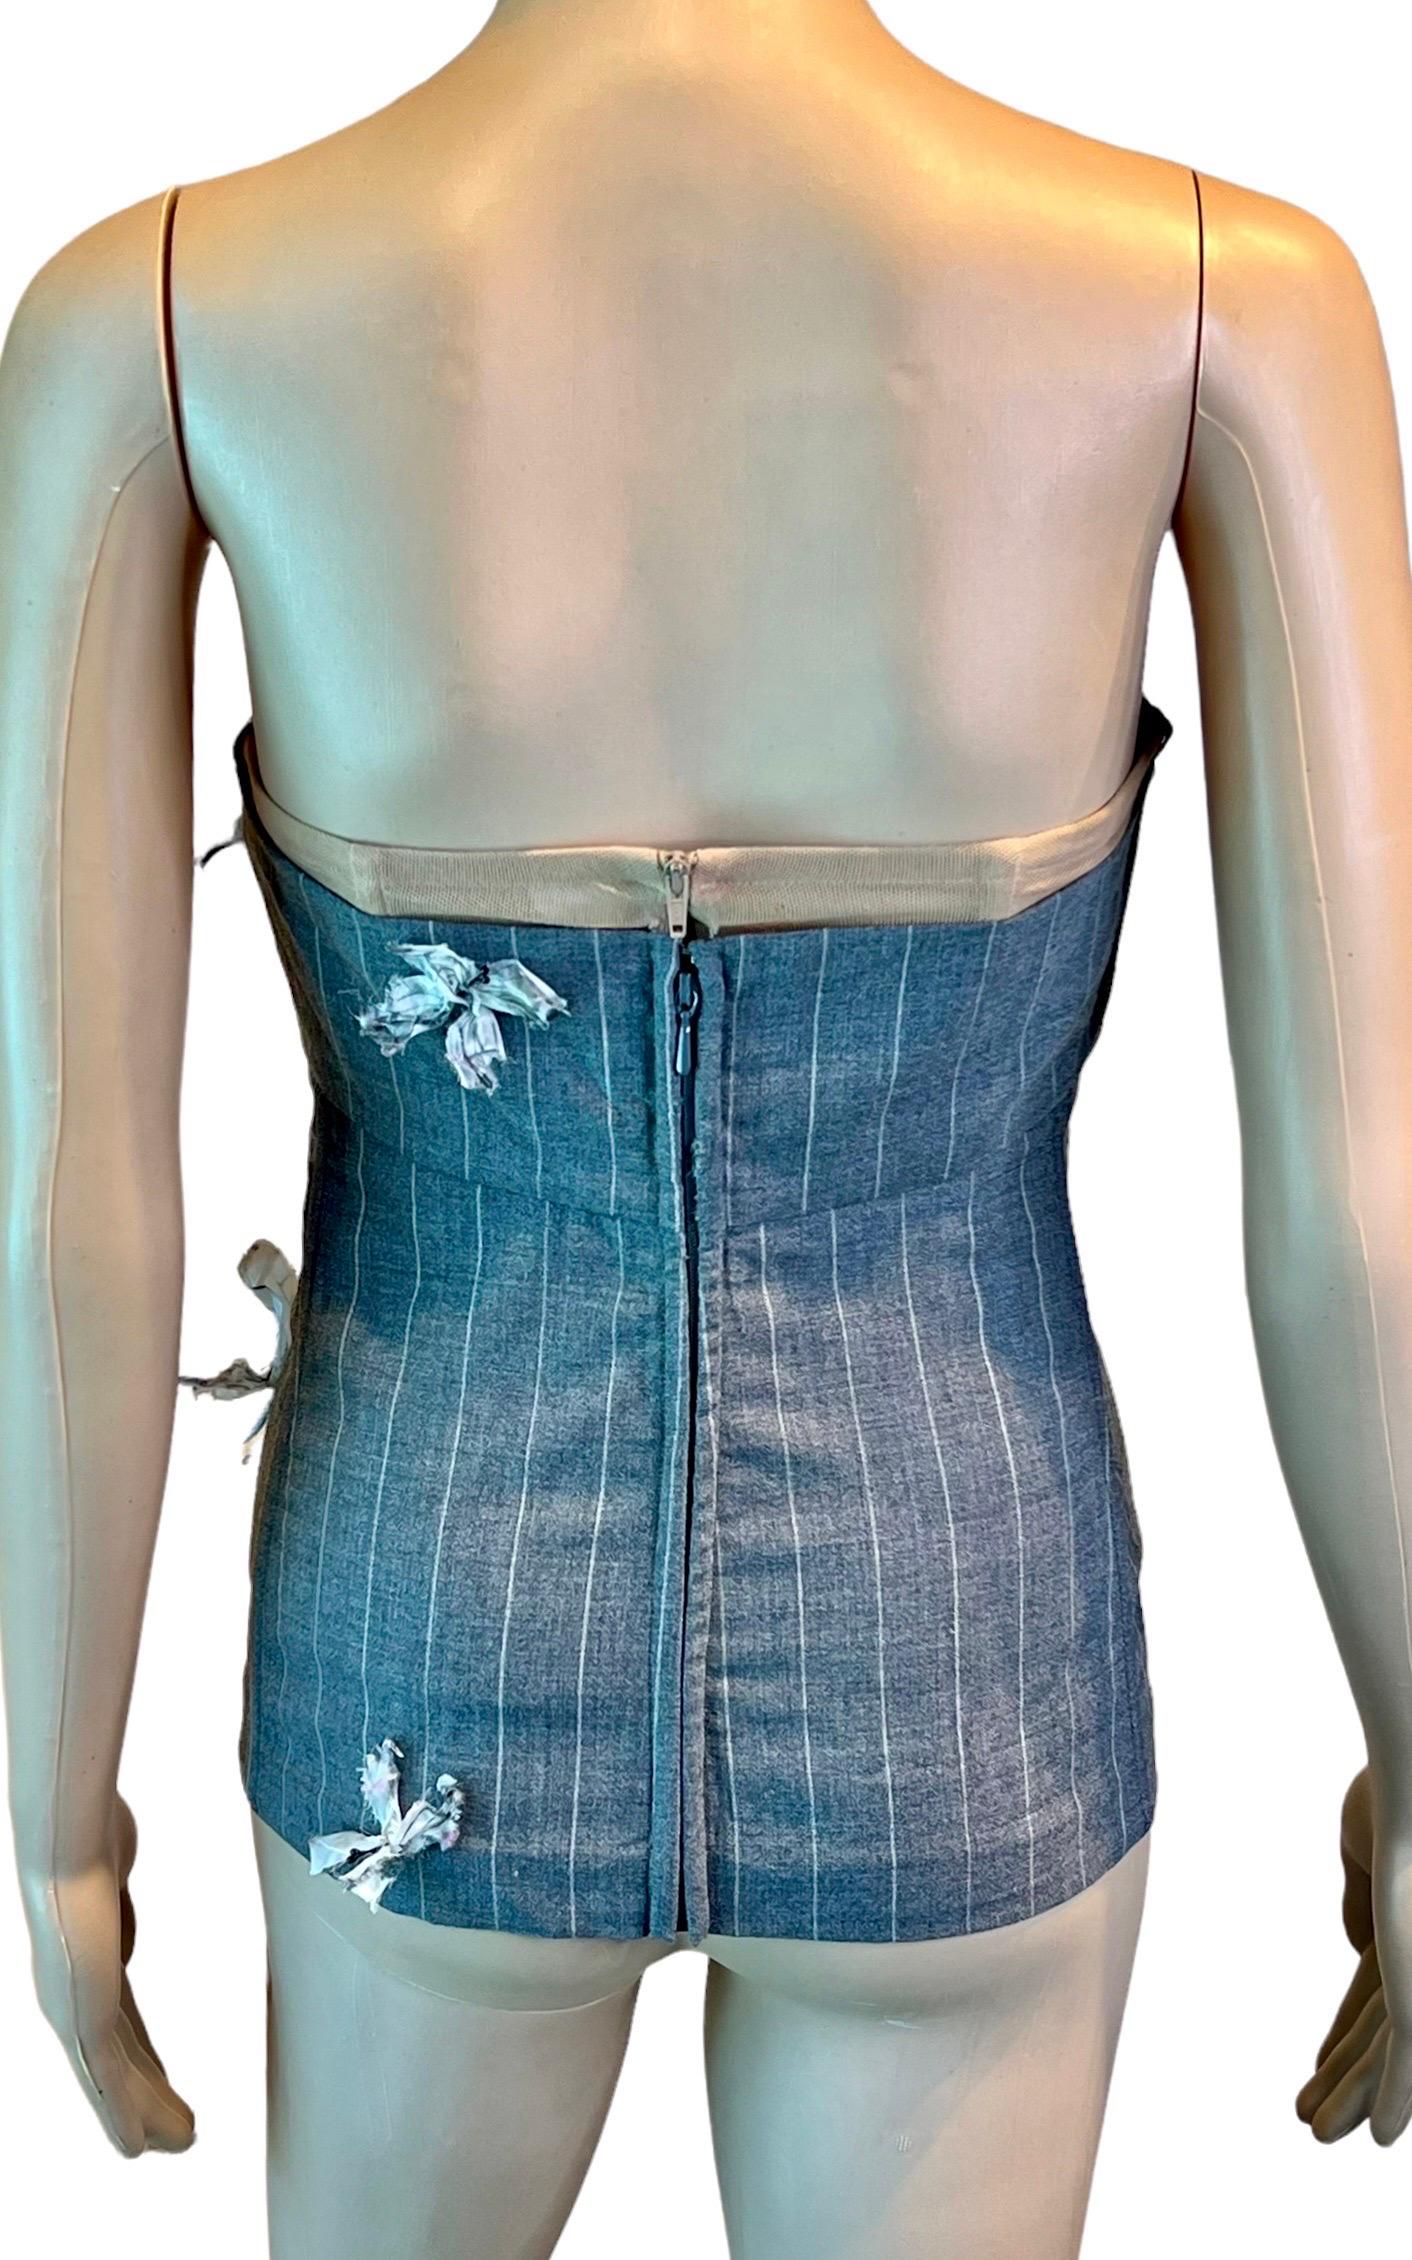 Blue Dolce & Gabbana S/S 1998 Runway Stromboli Collection Butterfly Corset Top